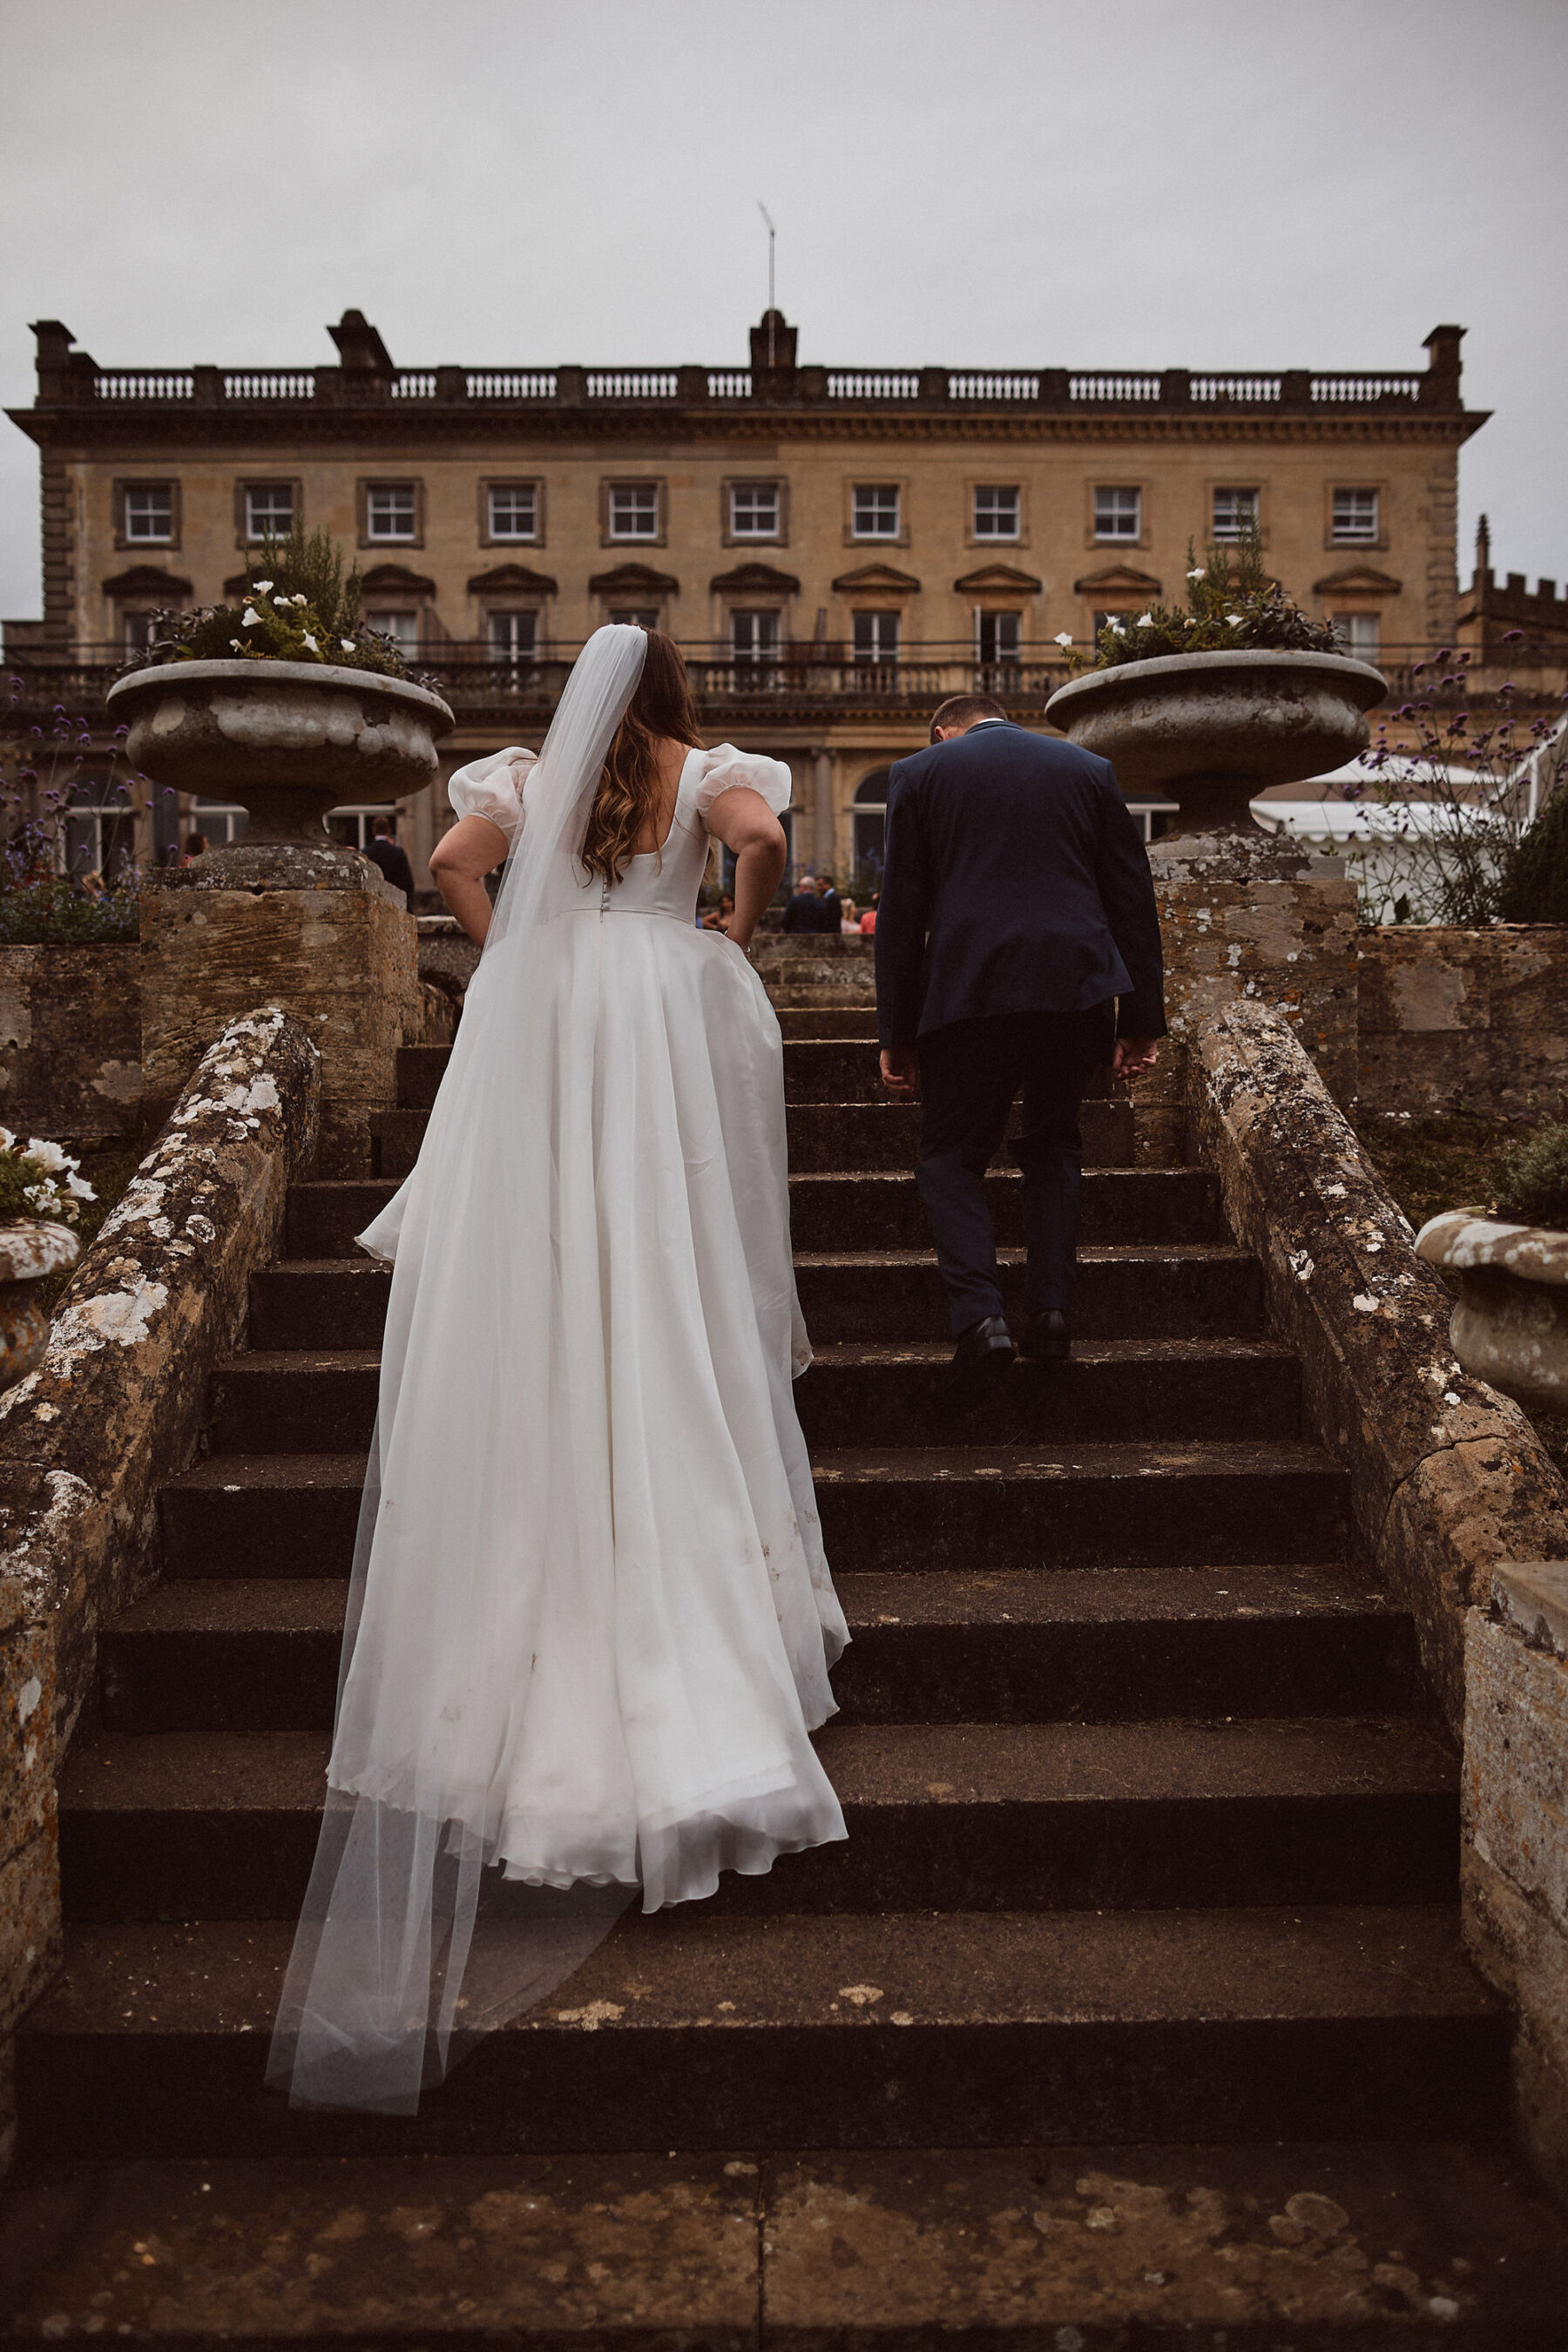 Bride and groom walking up the steps in the gardens of Cowley Manor in The Cotswolds.